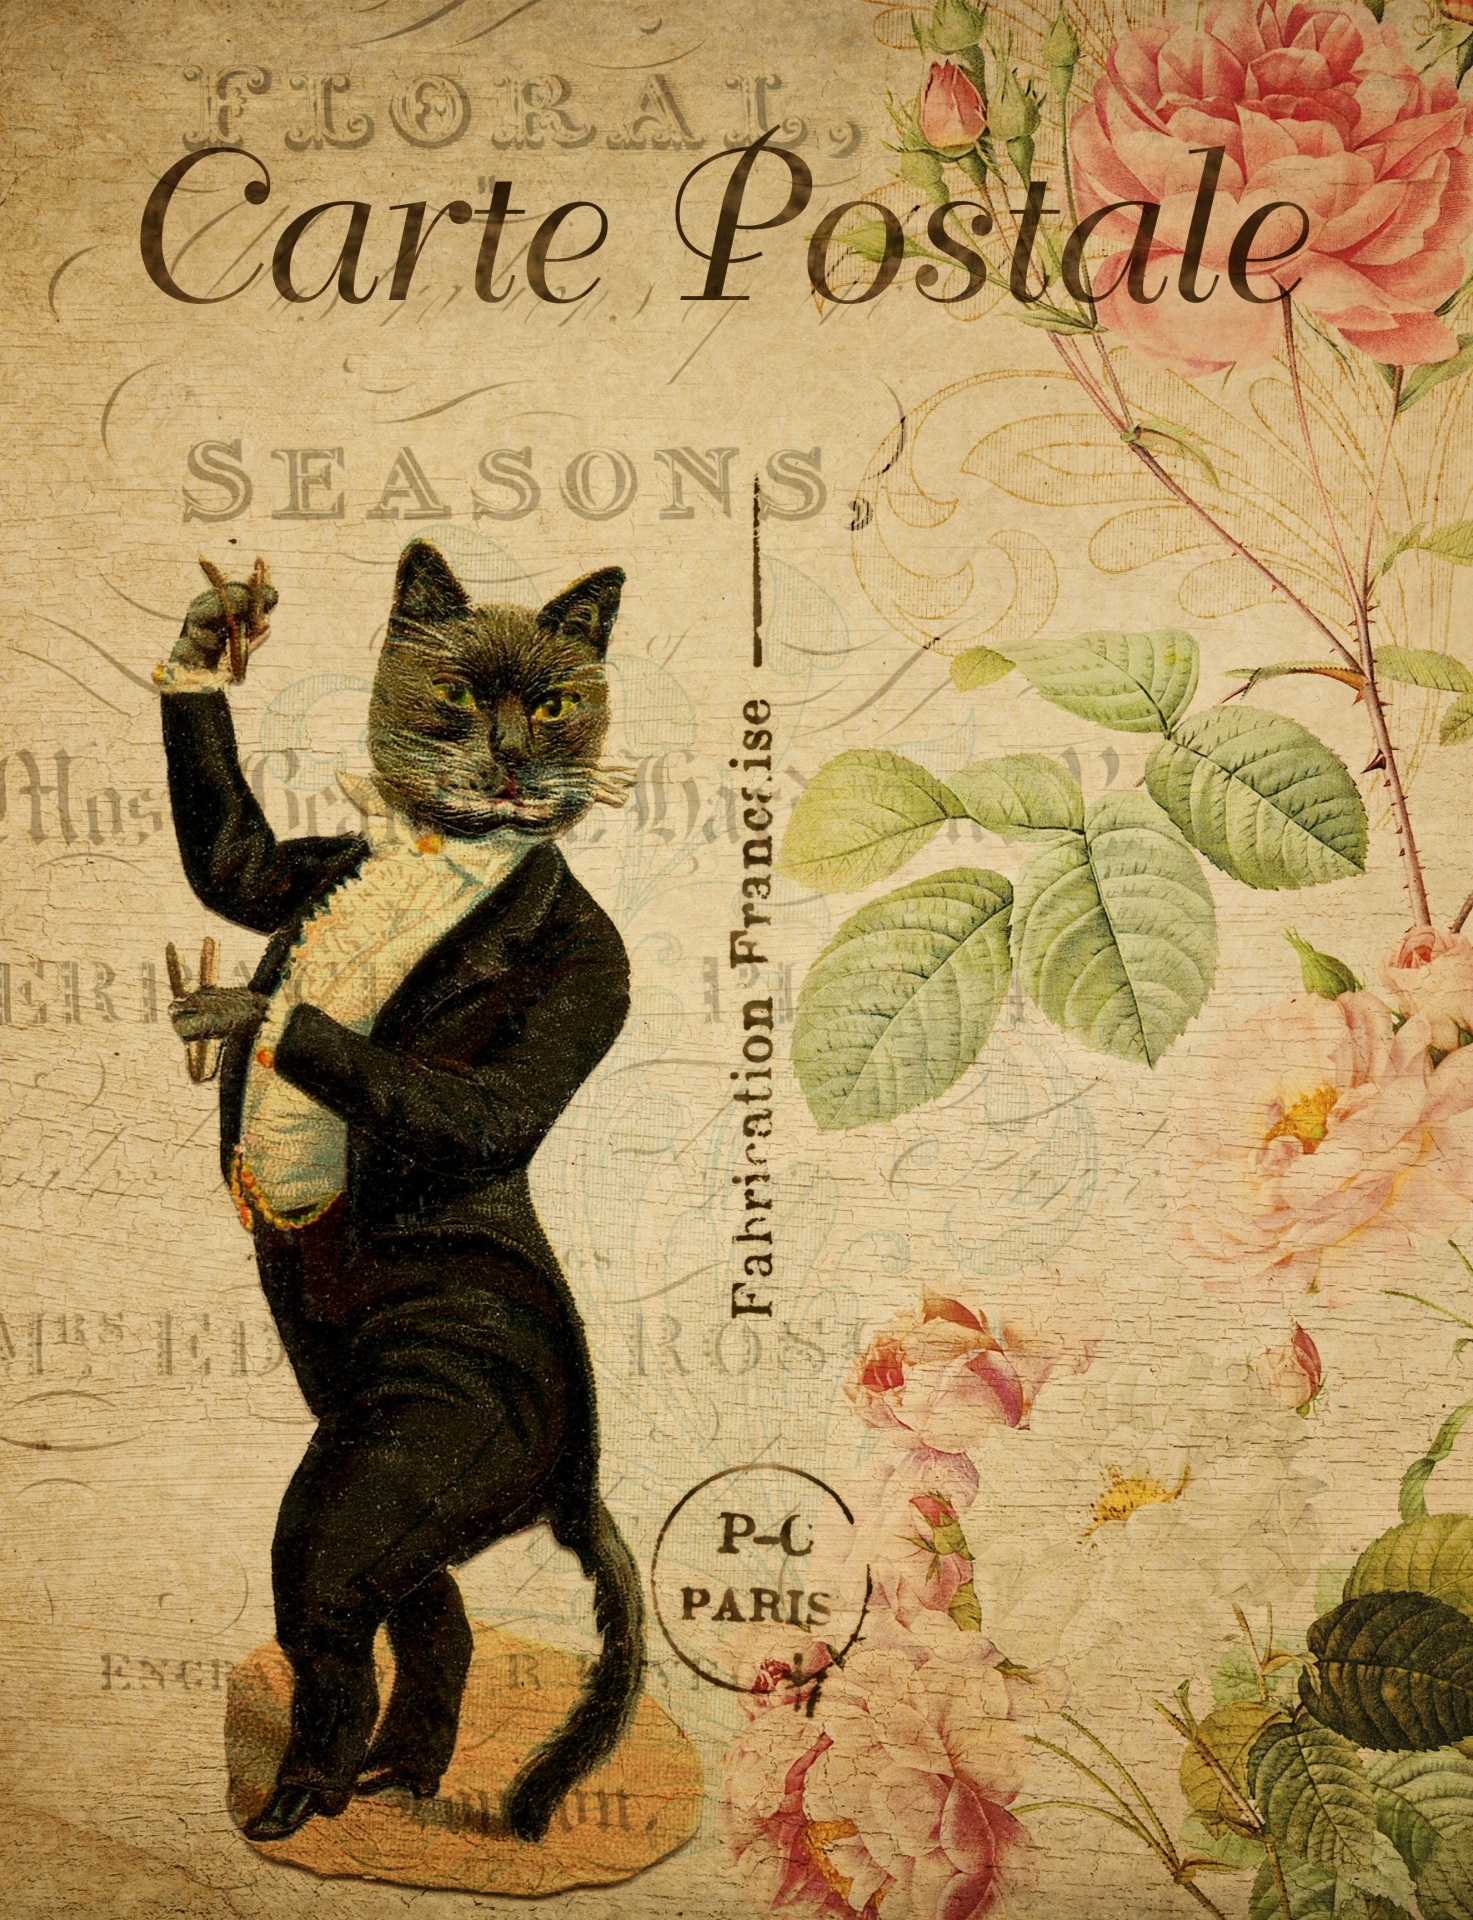 Dancing cat dressed in tuxedo on vintage floral french postcard